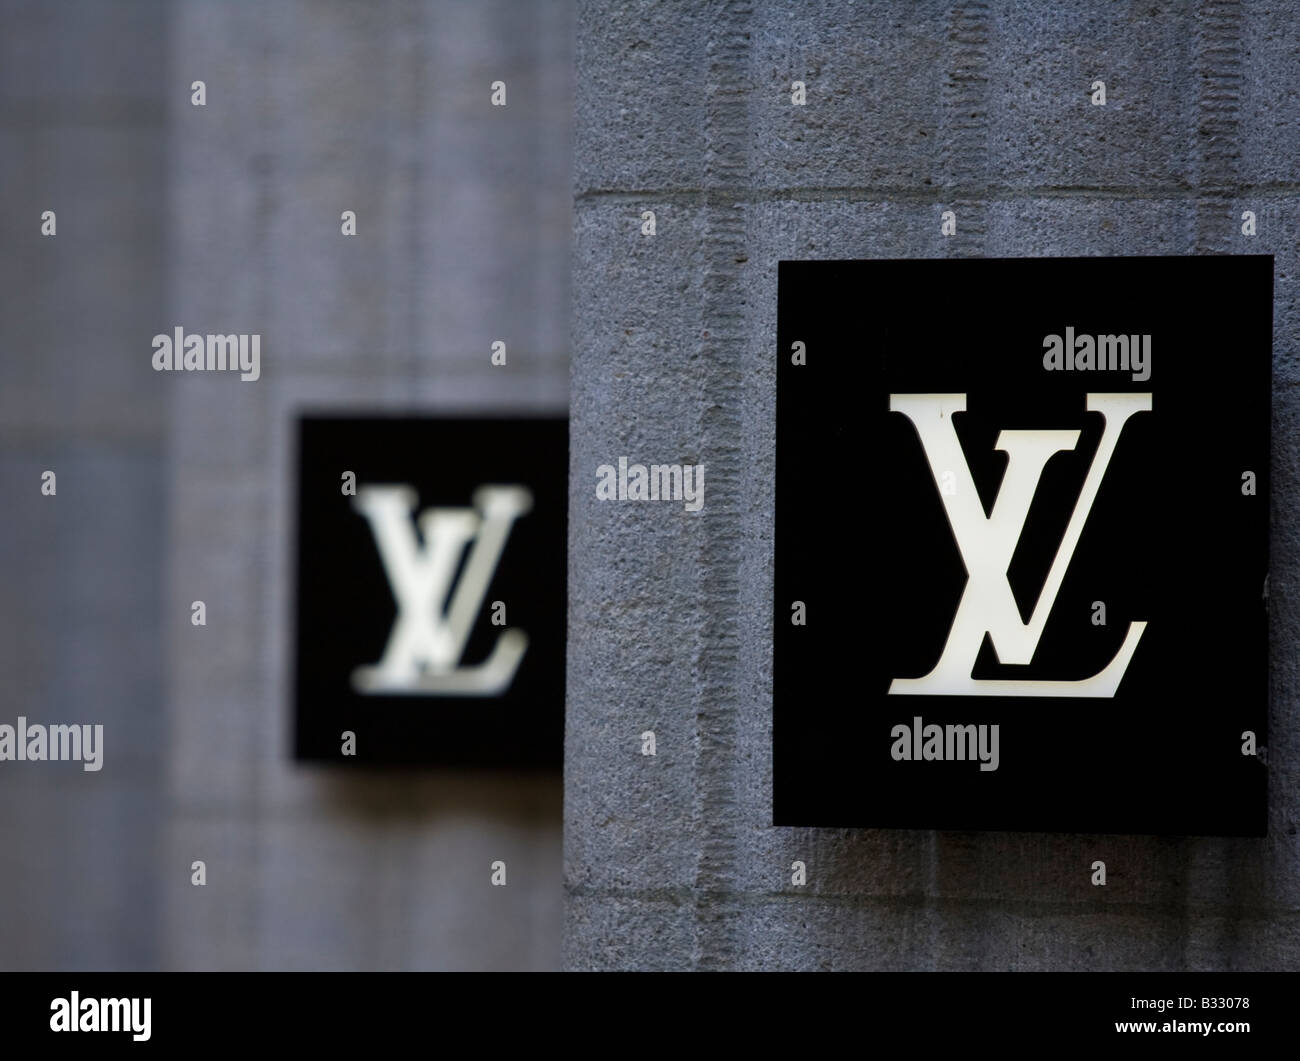 Louis vuitton logo hi-res stock photography and images - Alamy